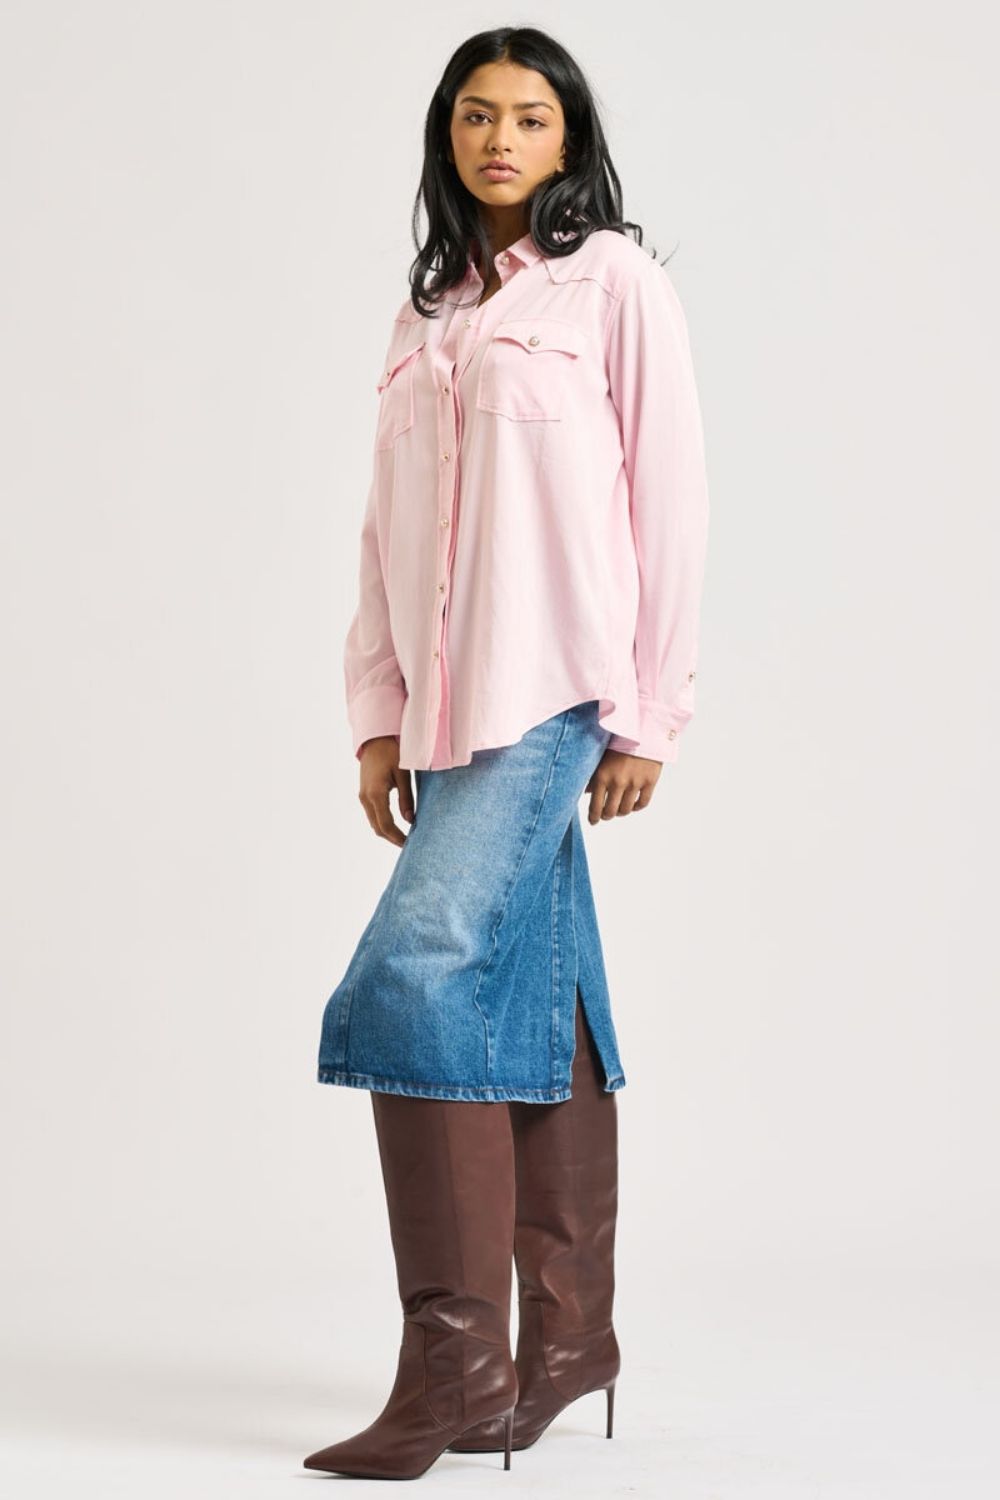 The Lady Rancher Classic Shirt - Baby Pink